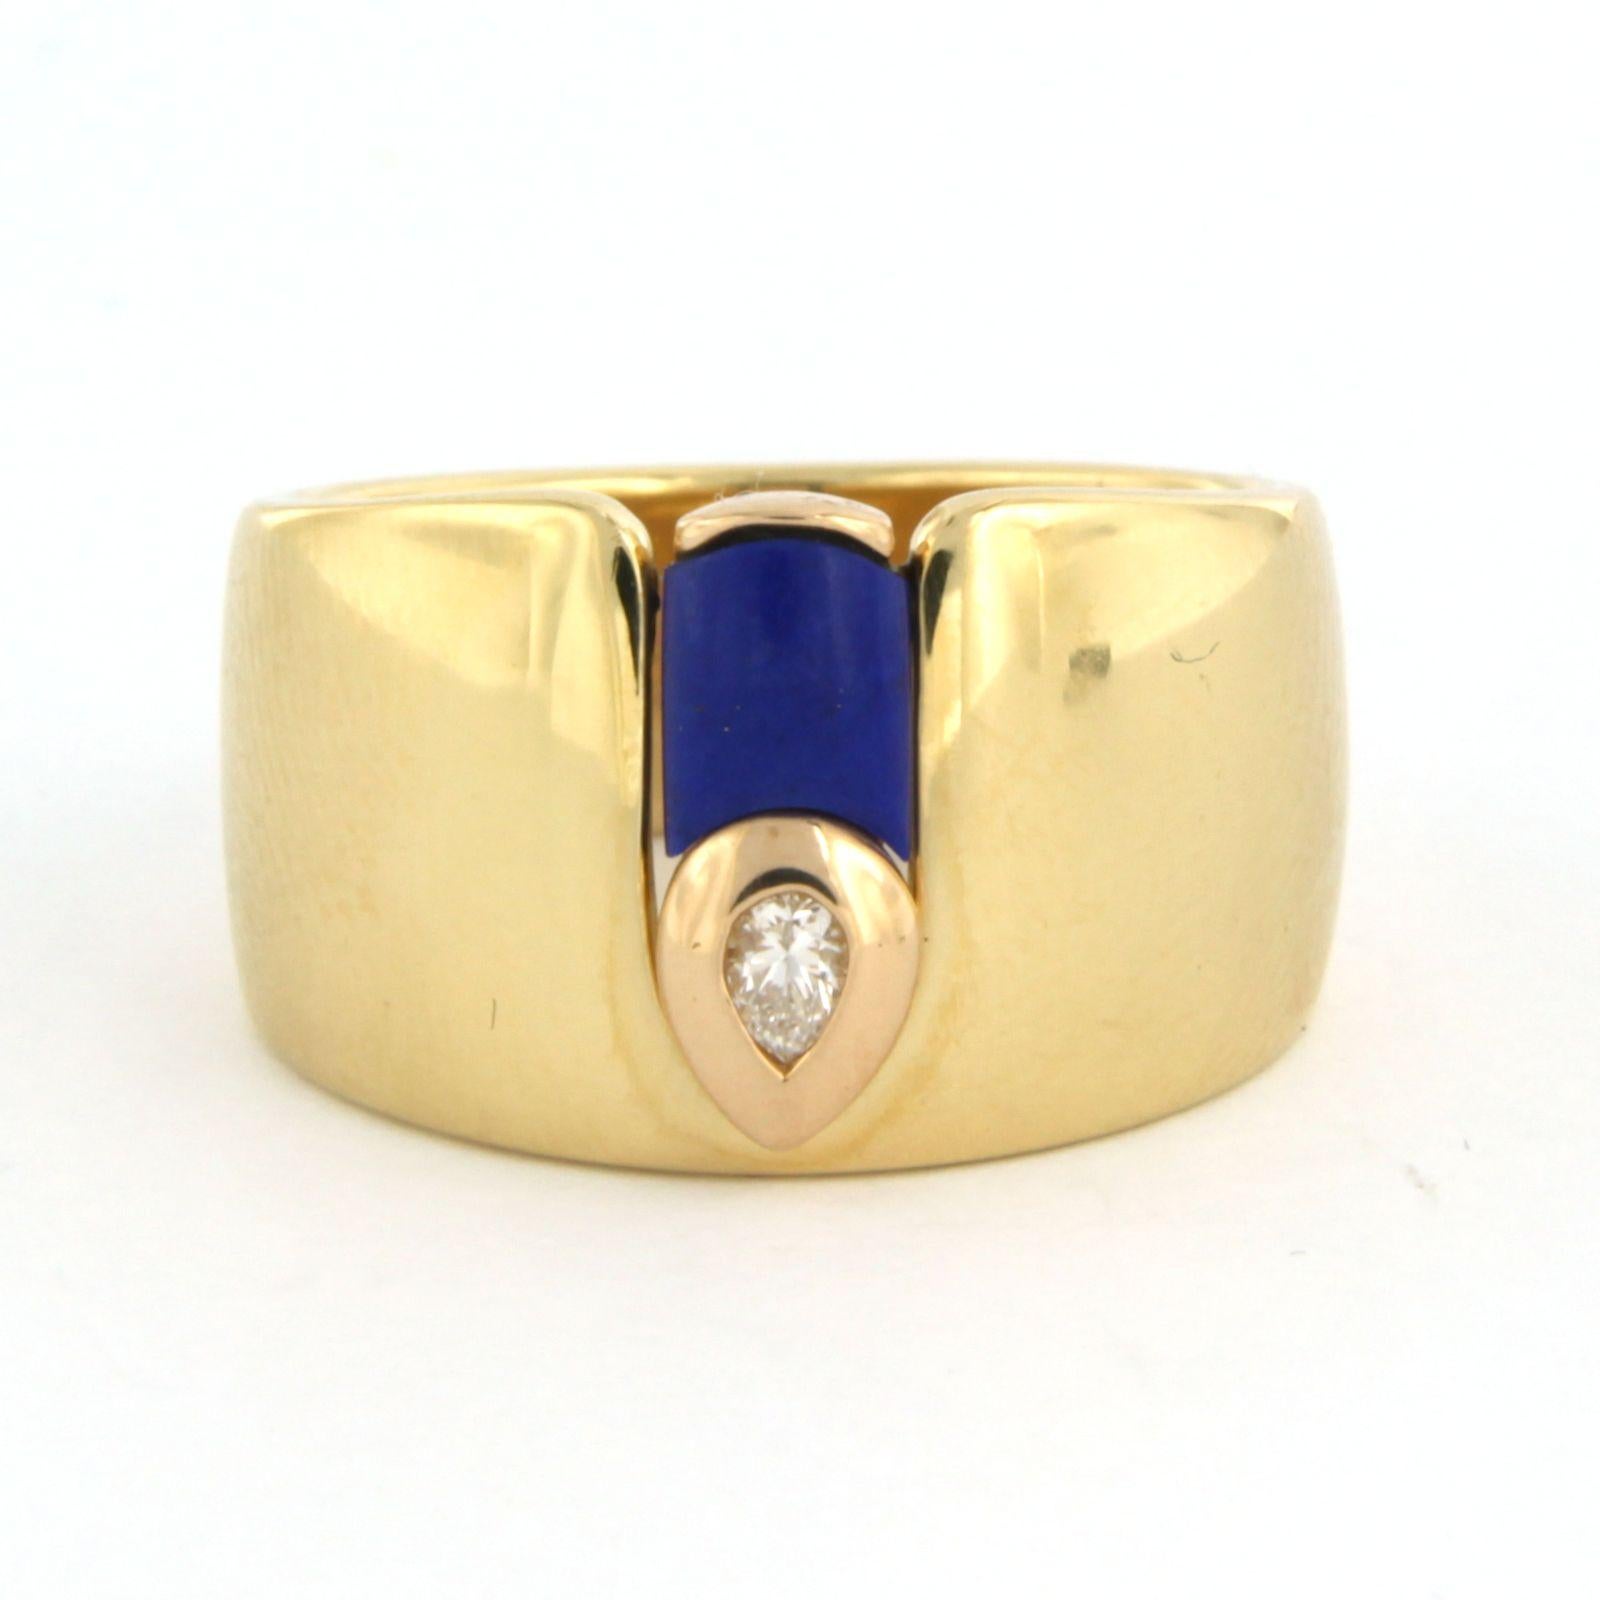 18k yellow gold ring set with a lapis lazuli and a pear cut diamond 0.07 crt F/G VS/SI - ring size U.S. 7 - EU. 17.25 (54)

detailed description:

The top of the ring is 1.2 cm wide by 3.7 mm high

ring size U.S. 7 - EU. 17.25 (54), the ring can be